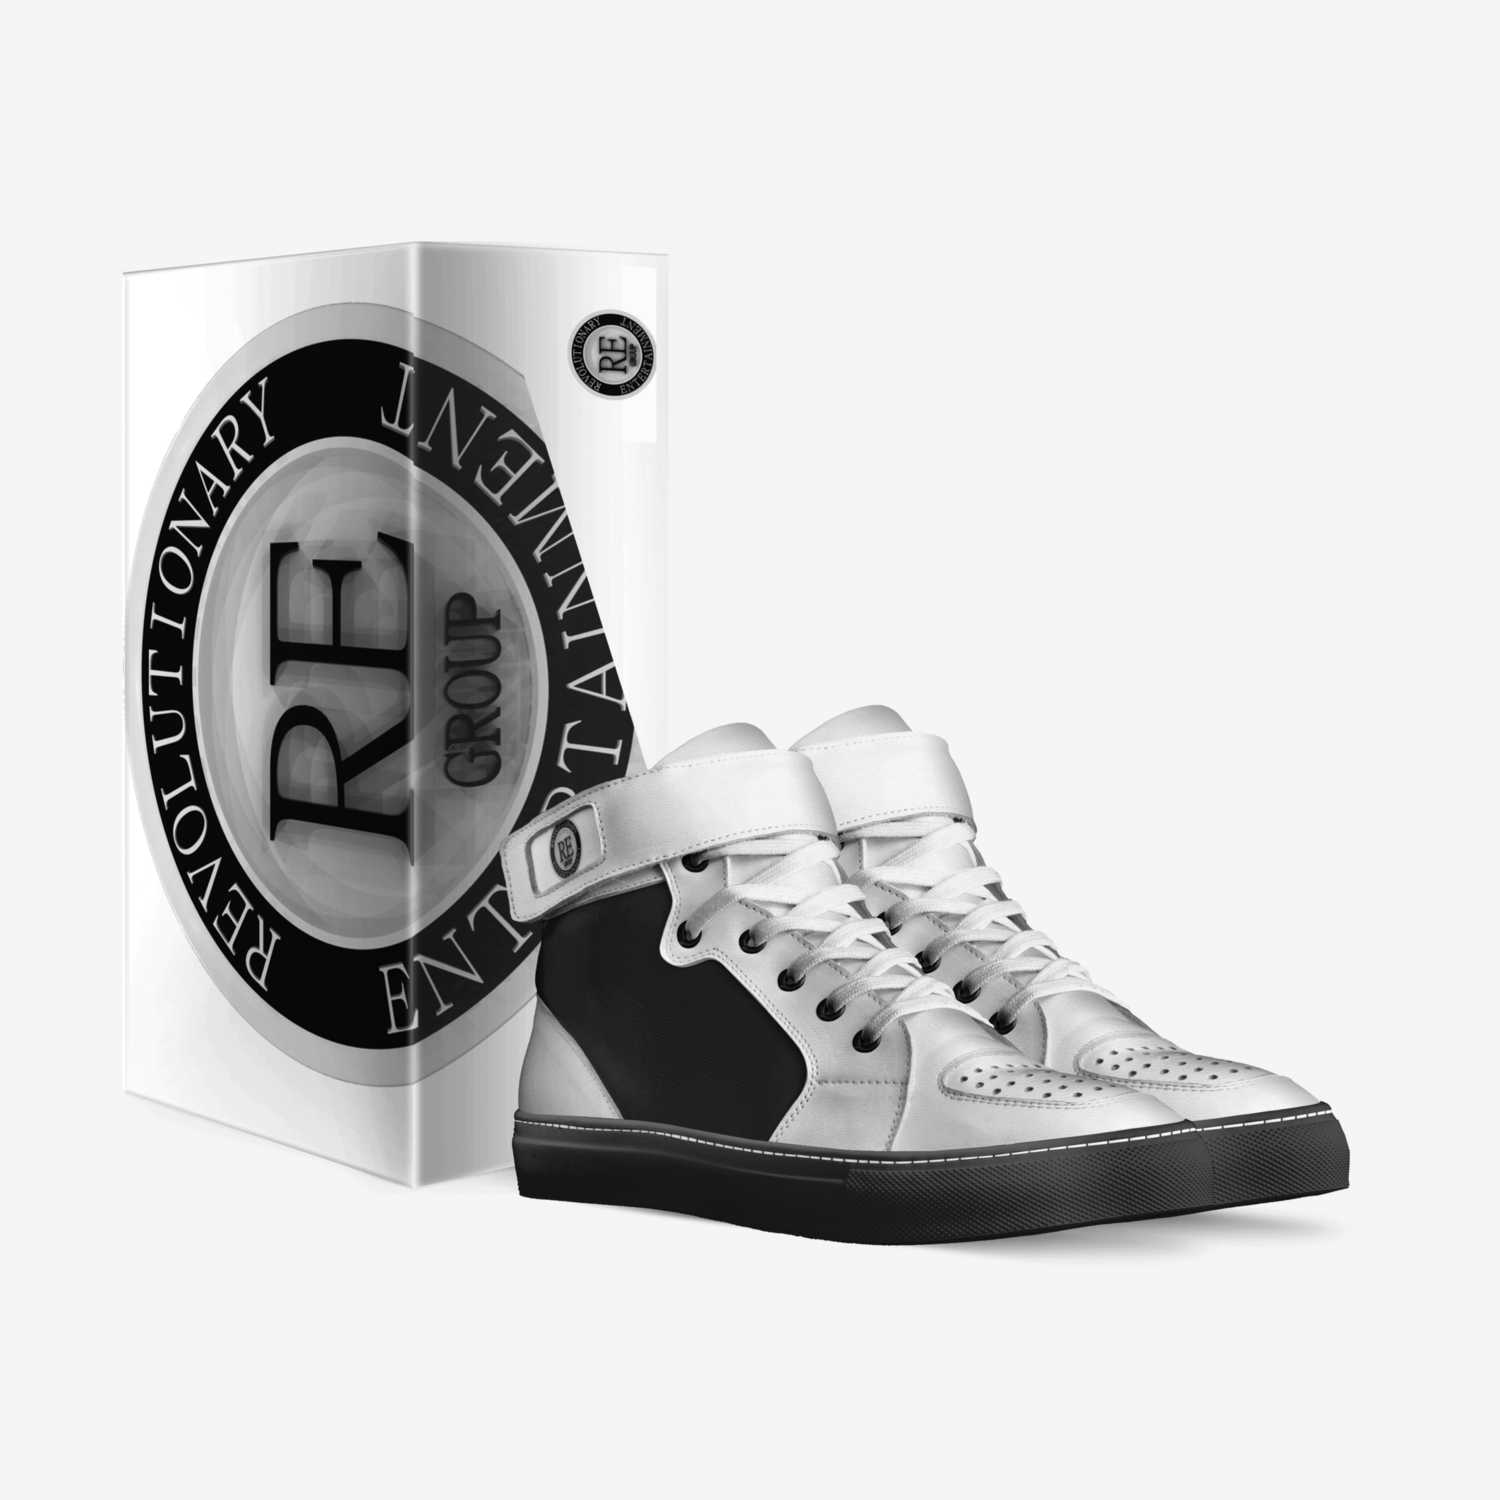 The Revolution 1's custom made in Italy shoes by Zackrey Ceasar | Box view